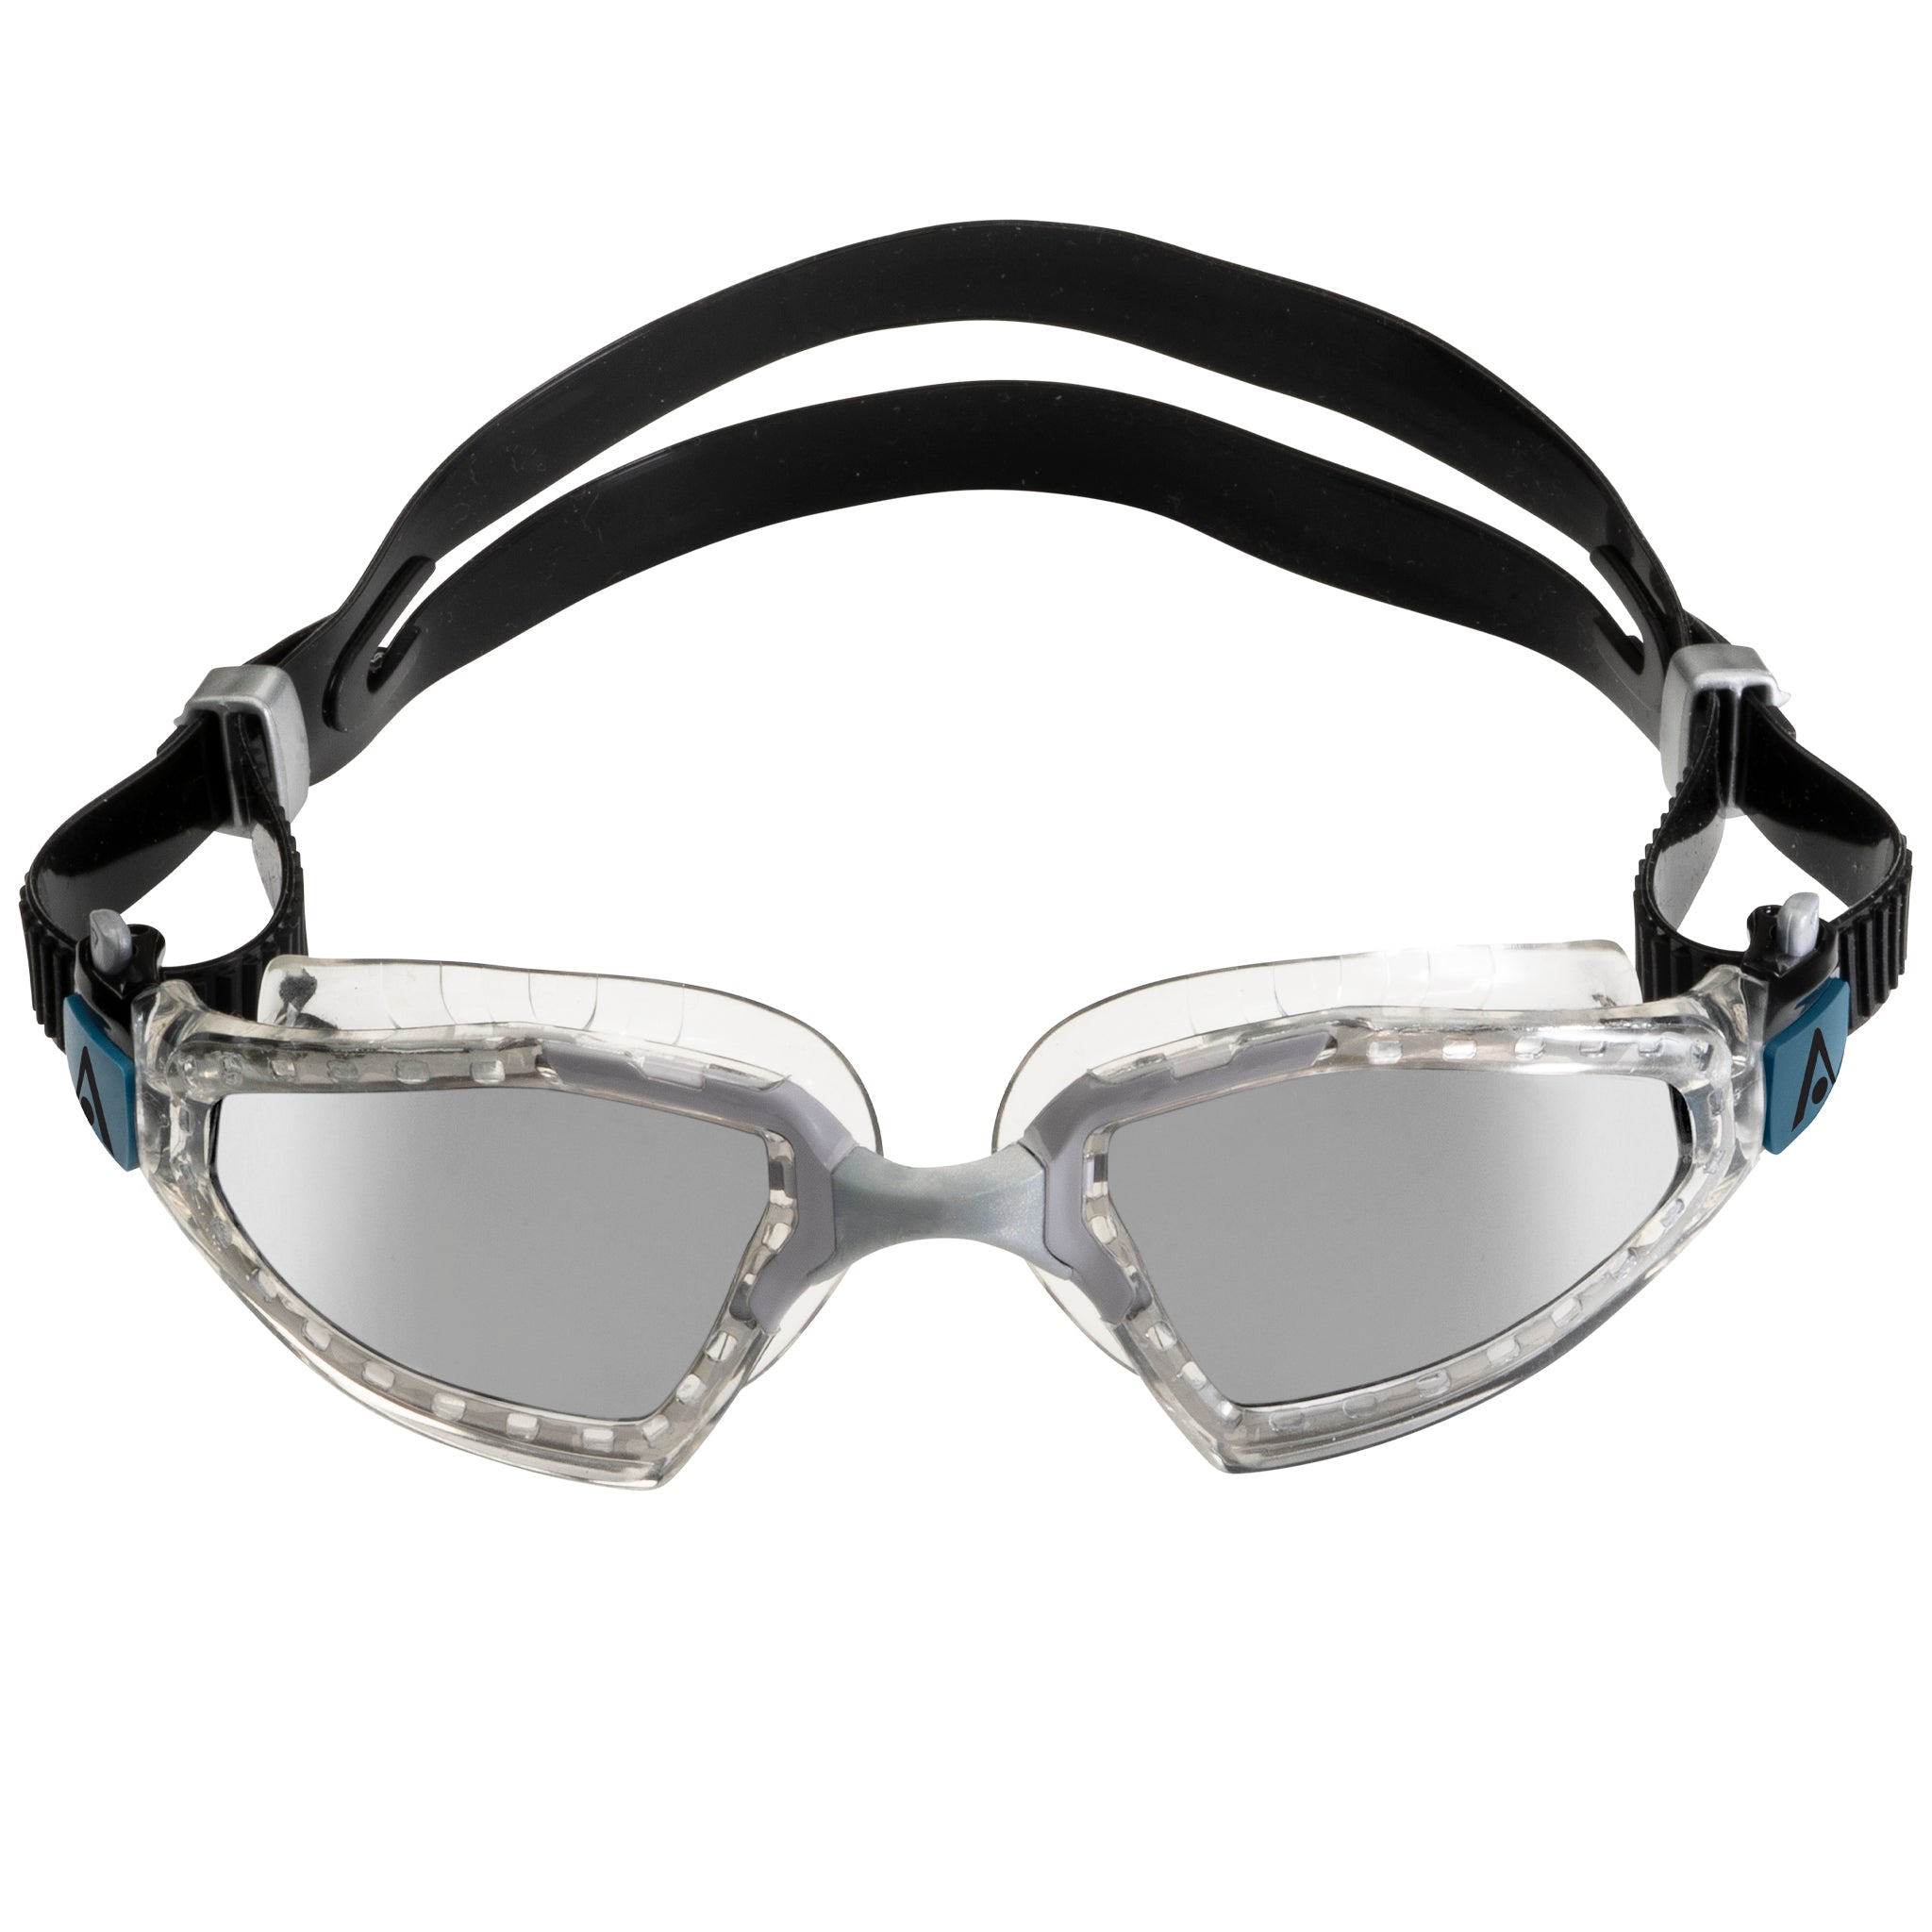 Aquasphere Kayenne Pro Swimming Goggles Silver Mirrored Lenses